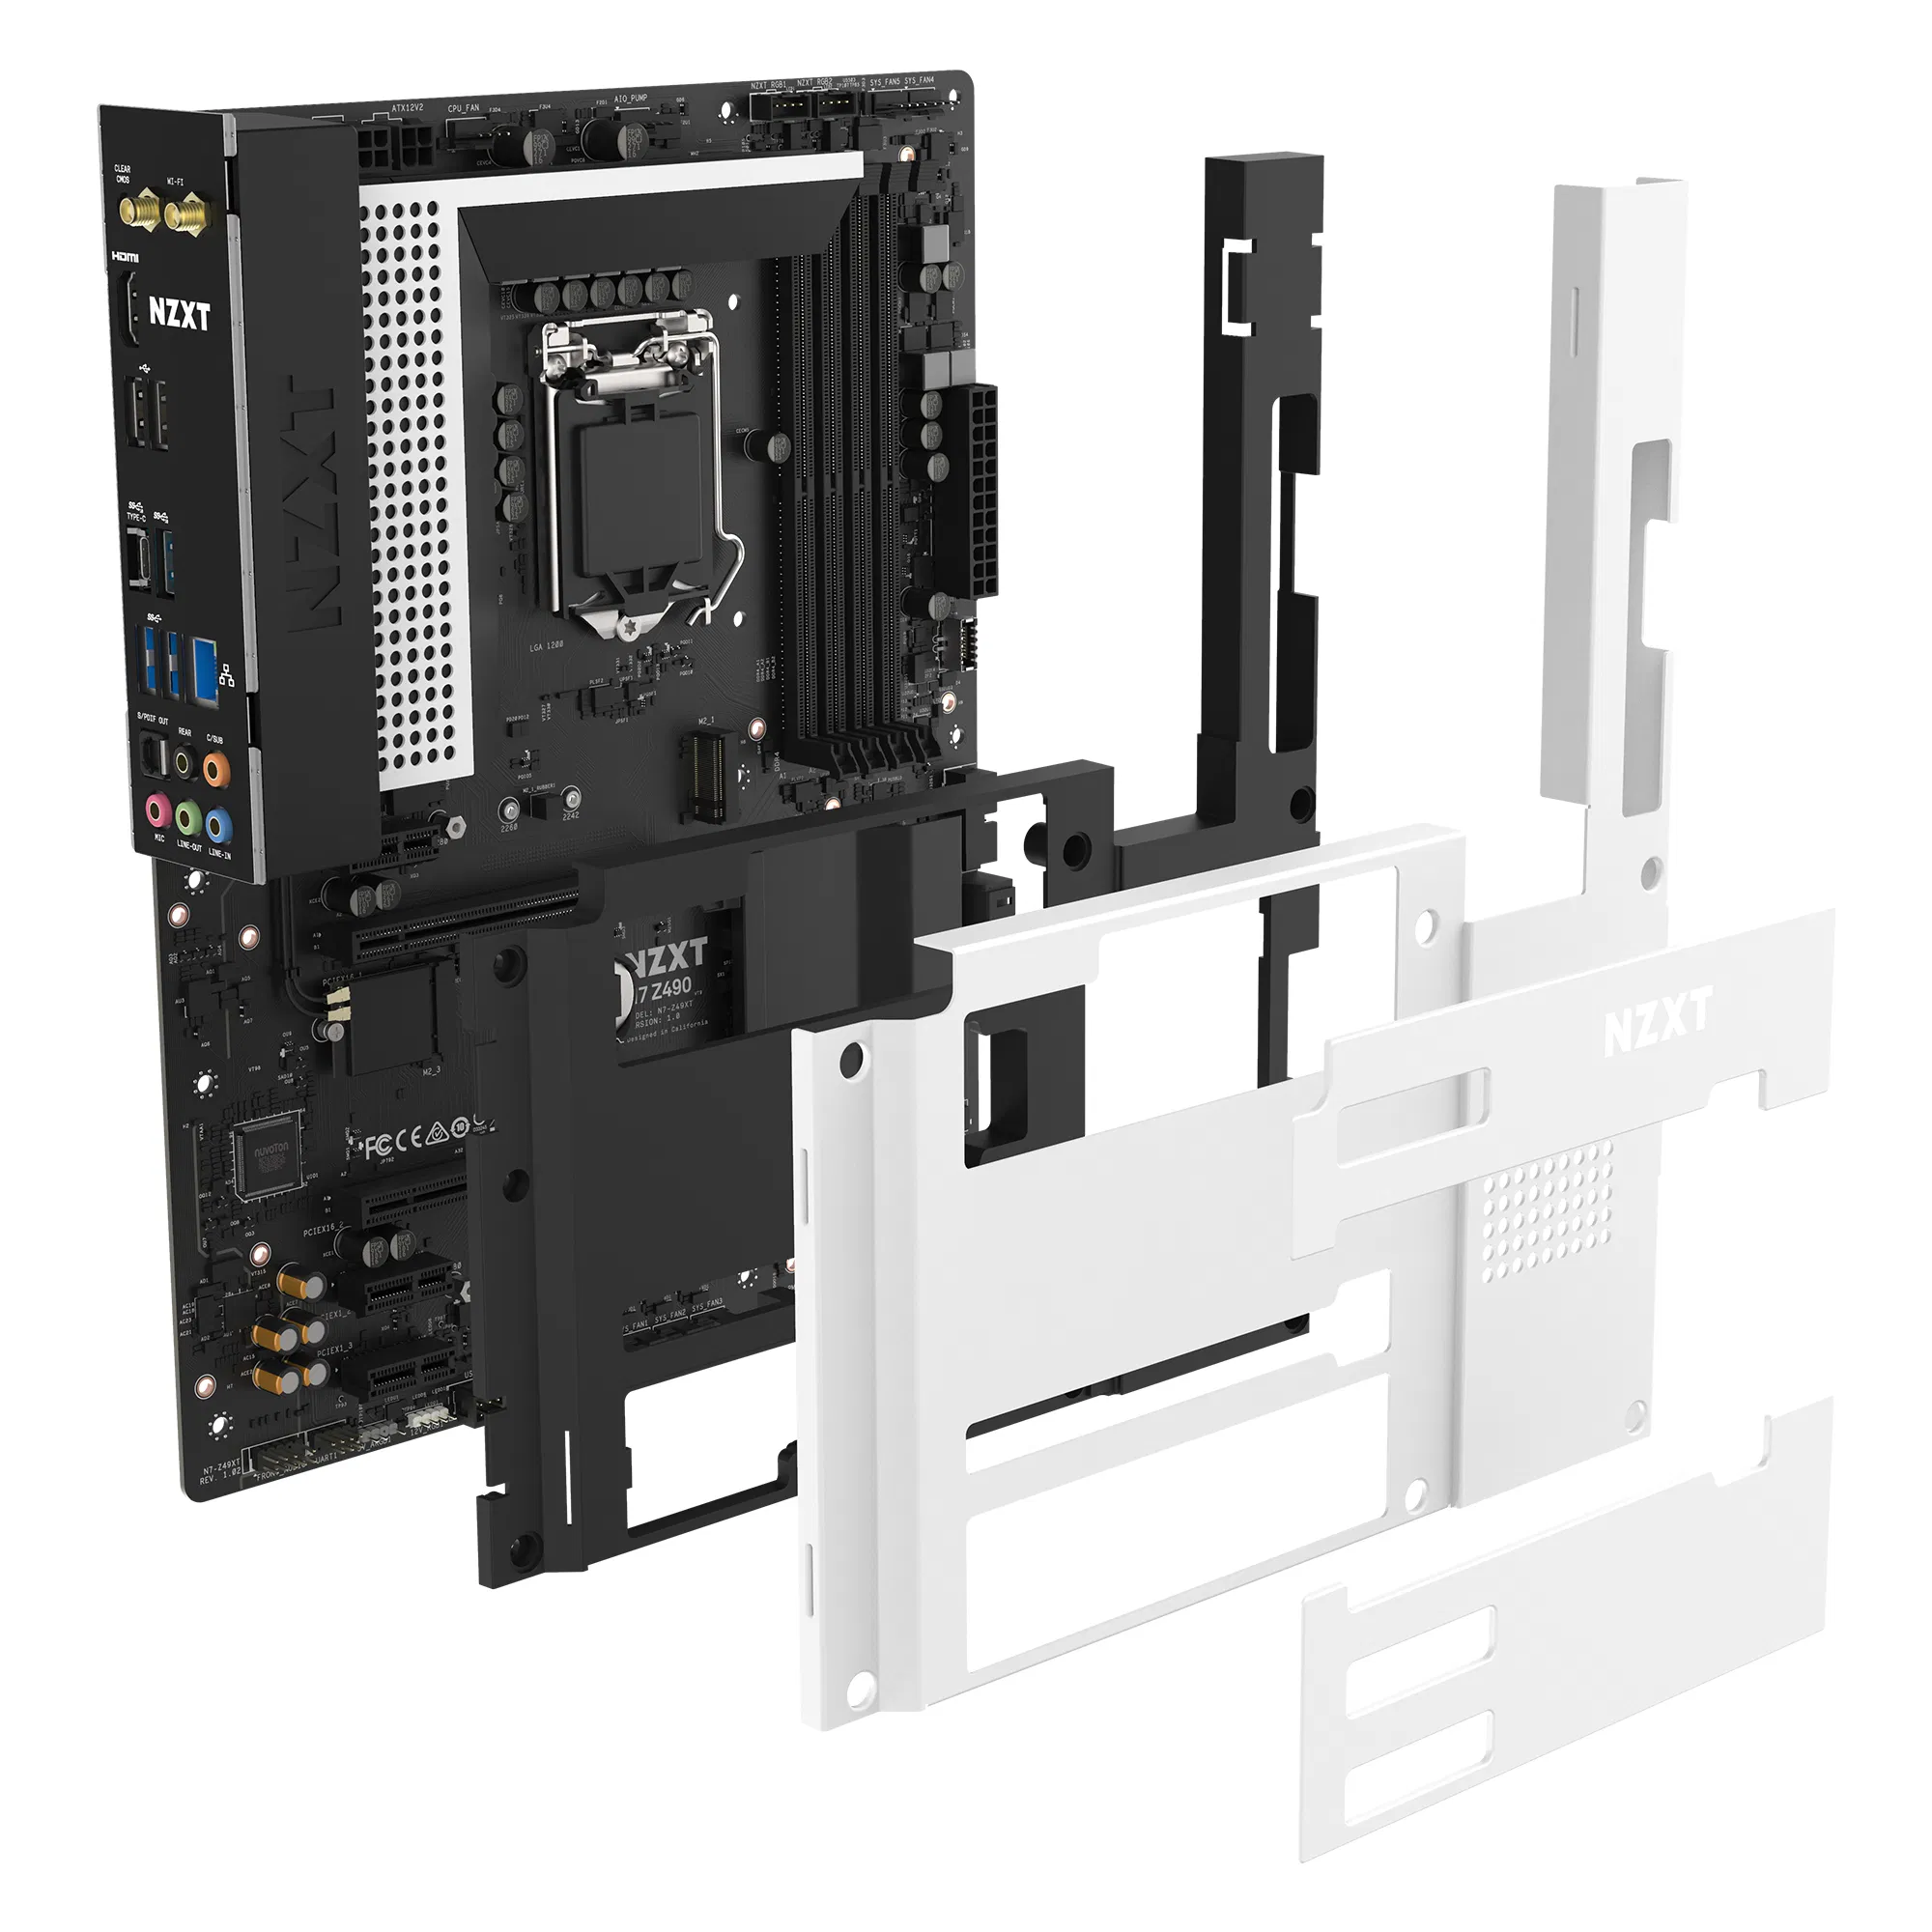 NZXT N7 Z590 ATX Motherboard Now Available